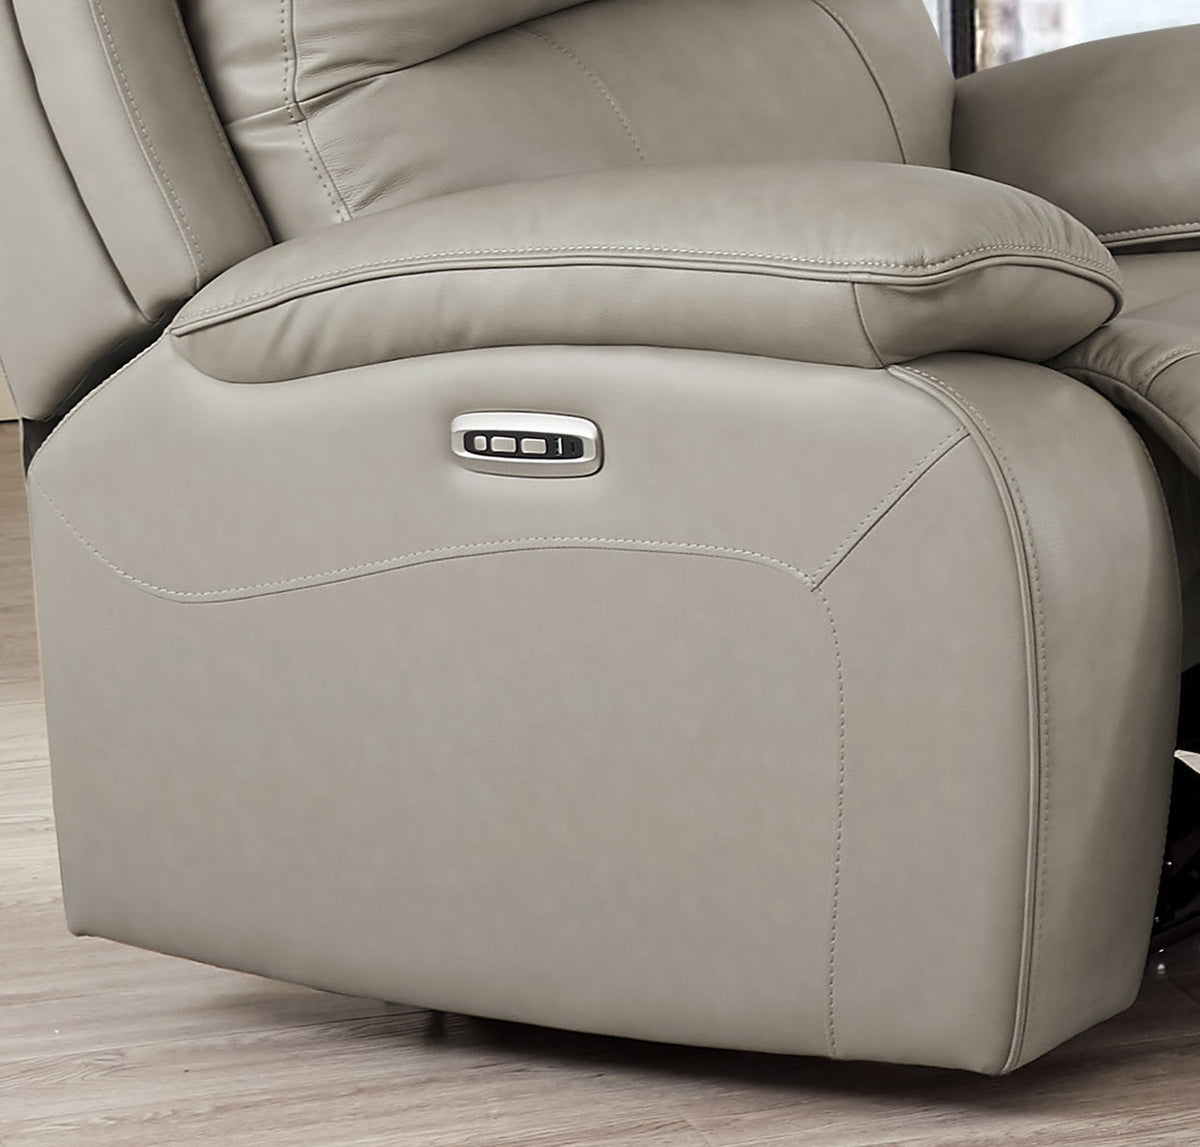 Westminster Leather Reclining Sofa Collection - MJM Furniture